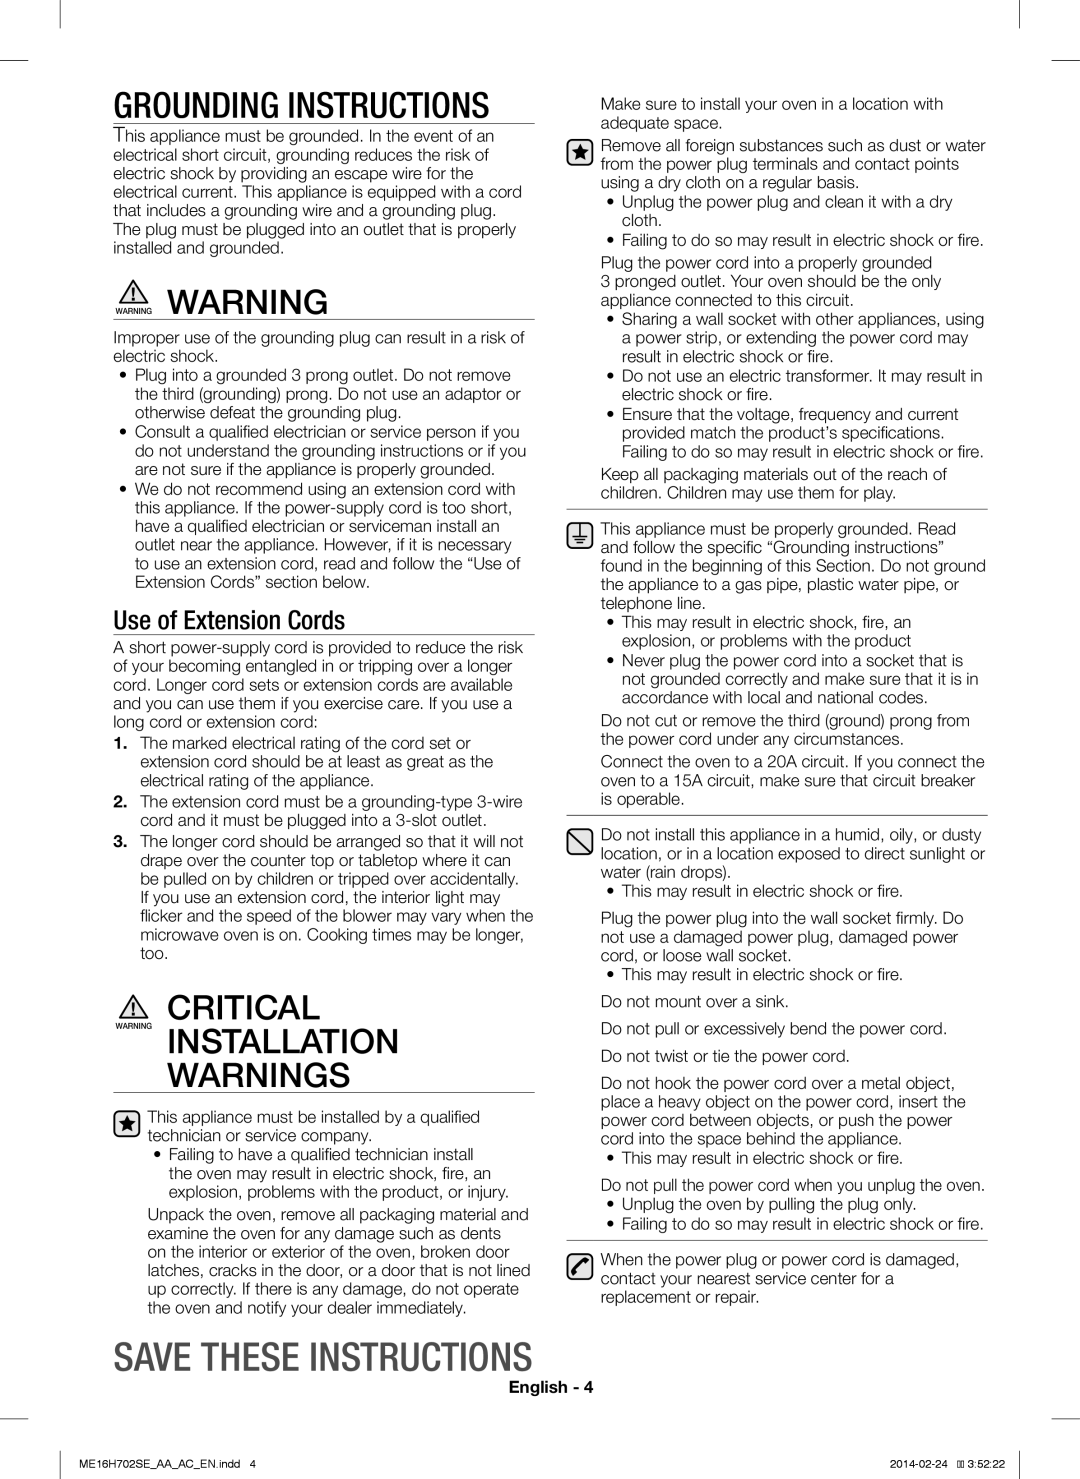 Samsung ME16H702SE Grounding Instructions, Critical Warning Installation Warnings, Use of Extension Cords, English 